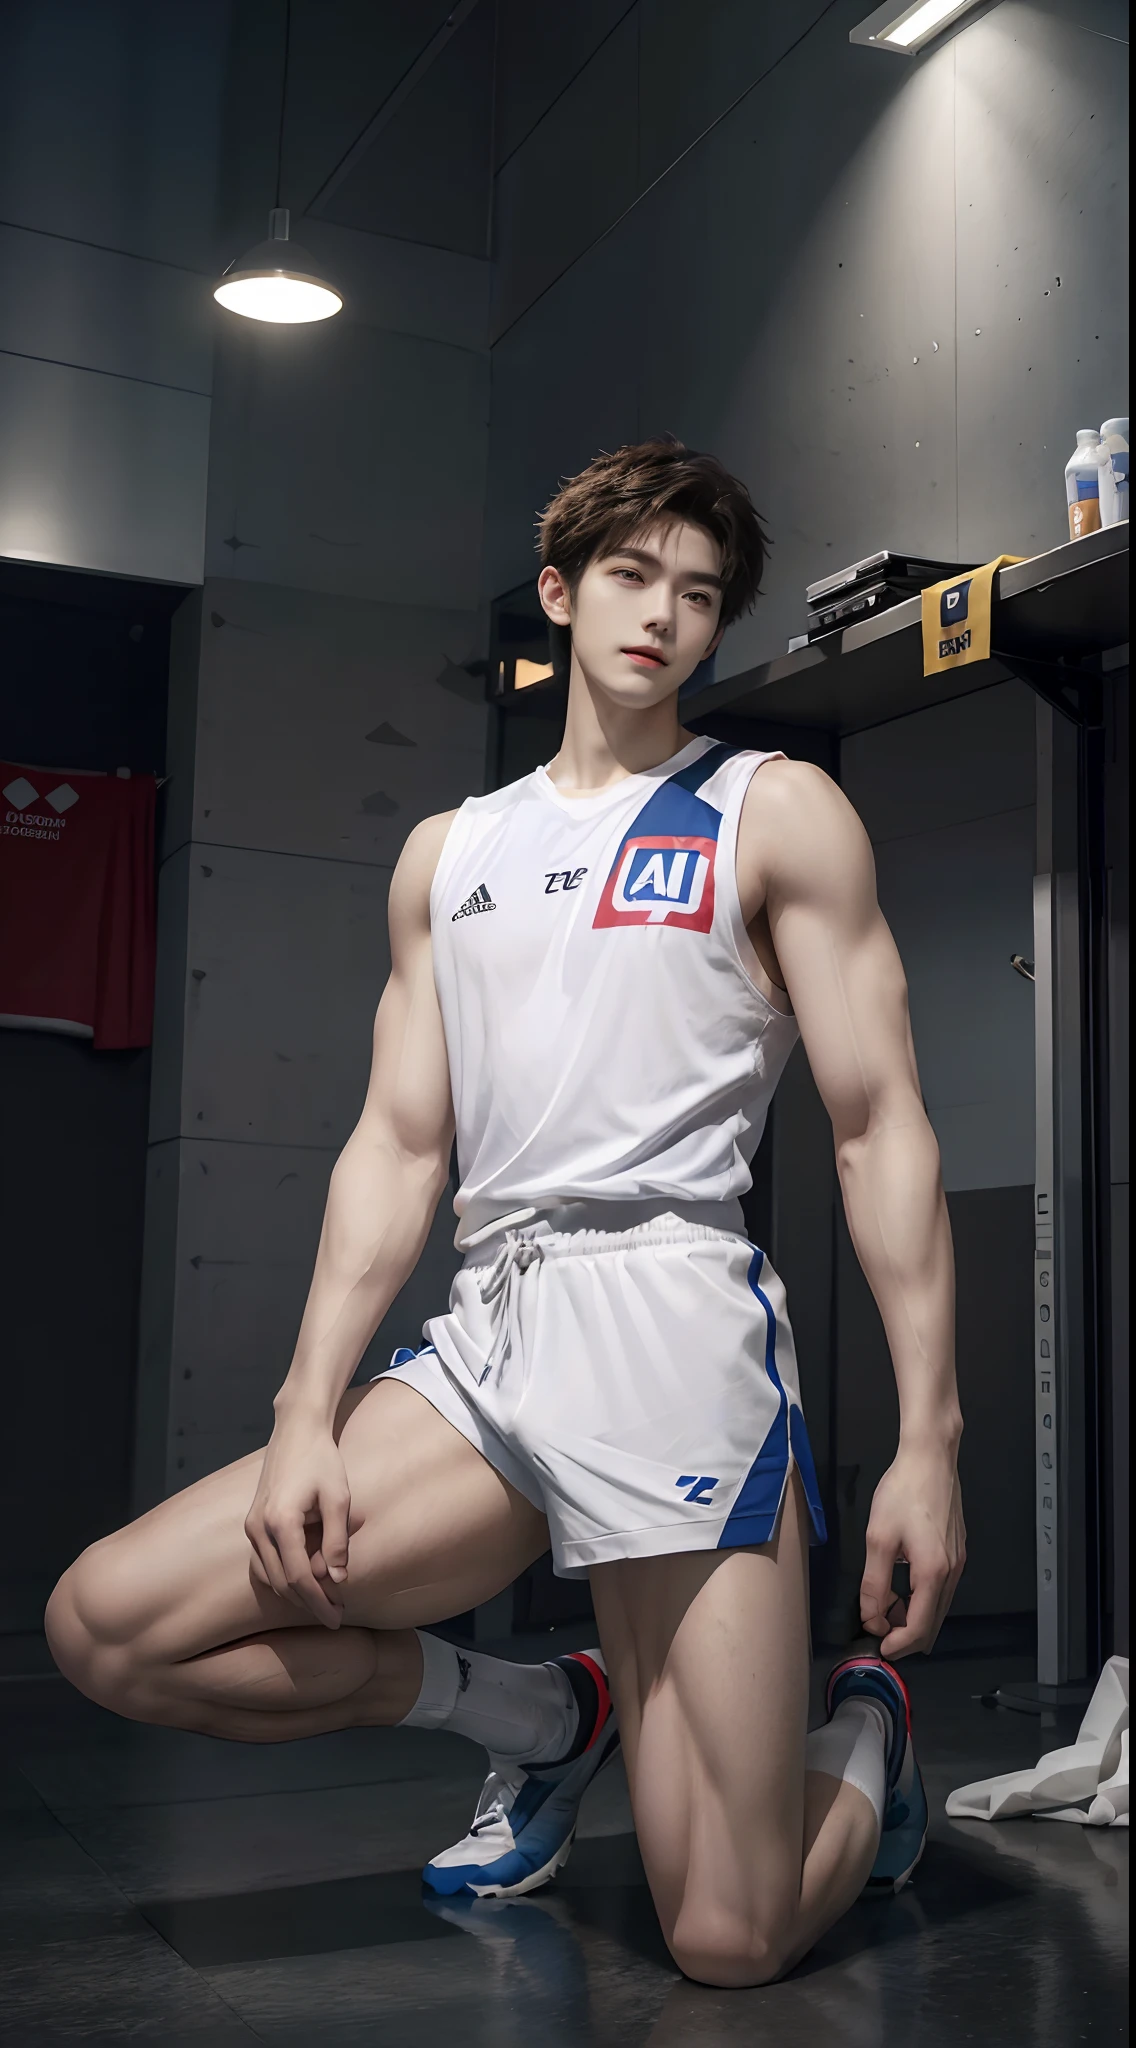 (((Best quality))),(((Ultra detailed))),(((Masterpiece)))，（Cute tall Shota：2），The height of a volleyball player，solo person，（full bodyesbian：3），（Stay away from the lens：3），Expose your legs，（revealing the whole body：2），（Frontal heads-up view：1.2），malefocus，（looking at viewert），16 yaers old，（Tall：3），（Tall guy：2），Super tall，（Height 300 cm：2），Excellent body proportions，muscular physique，（1.The shoulders are 5 times wider：1.2），（Slender straight legs：2.5），Slender feet，small headusculous，（The face of the animated male protagonist），Pure face，（Very detailed beautiful face and eyes：2），（Big bright eyes：1.2），Sharp eyeliner，Clear and beautiful face，，exhilarated，（Happy smile：2），short detailed hair，（Correct facial features），（tilts your head：1.5），（Men's soccer jersey：2)，Long white sockuscle firming：2），Strong，（Wide shoulders and narrow waist：2.2），Sports men's socks，Detailed muscle texture，Highlights muscle structure，At home，（He was kneeling on the ground：4），（full length shoot），ultra-realistic realism, (Photorealistic detail), Incredible accuracy, lifelike textures, masterful technique, Jaw-dropping precision, artistic dedicatiotomy correct），Good lighting，exquisite detailing，Best quality，stunning masterpiece，CG，（Colored screen）